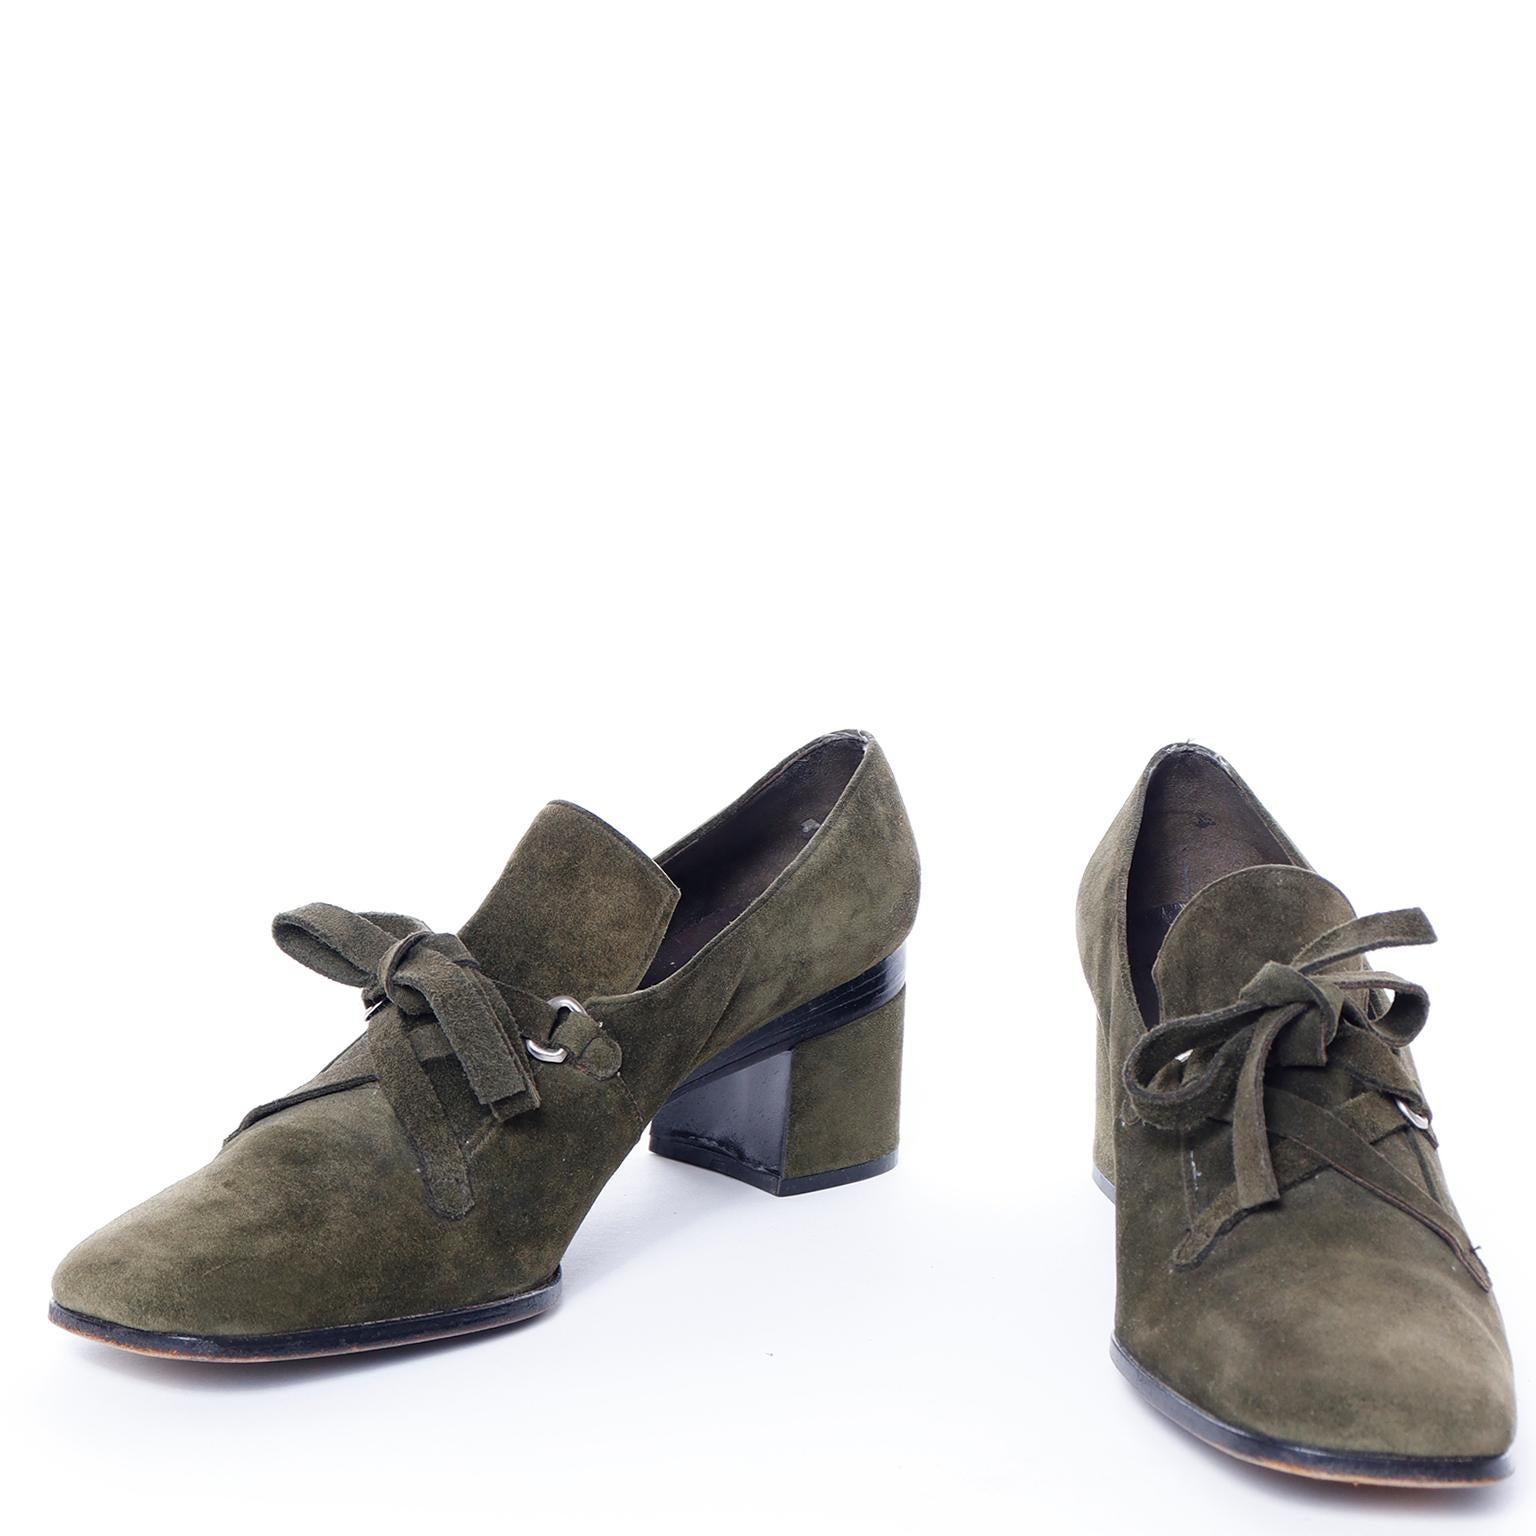 These vintage late 1970's Charles Jourdan Paris shoes were made during the most important and popular time for the brand. Charles Jourdan himself died in 1976, but when his son Roland Jourdan took over as head designer, the brand became ultra